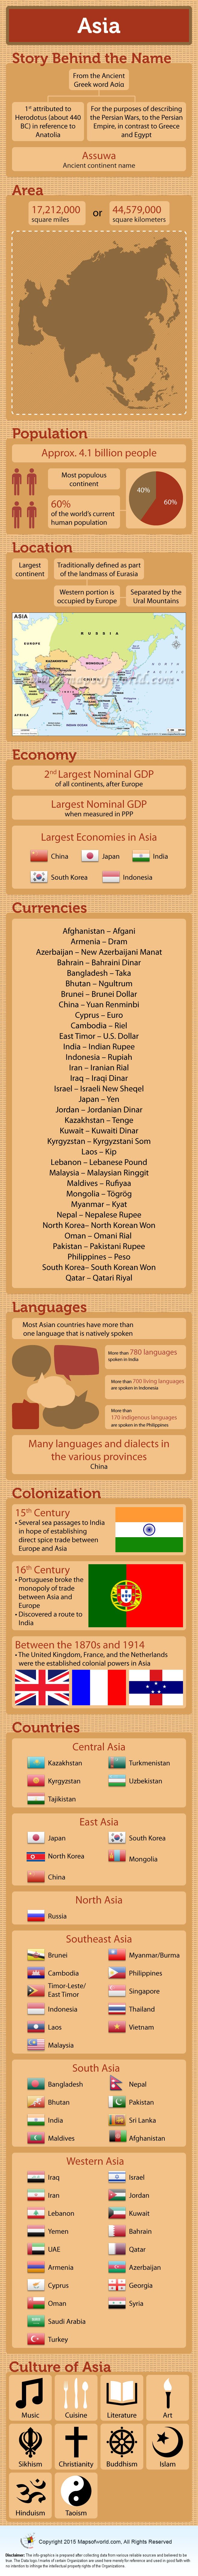 Infographic of Asia Facts